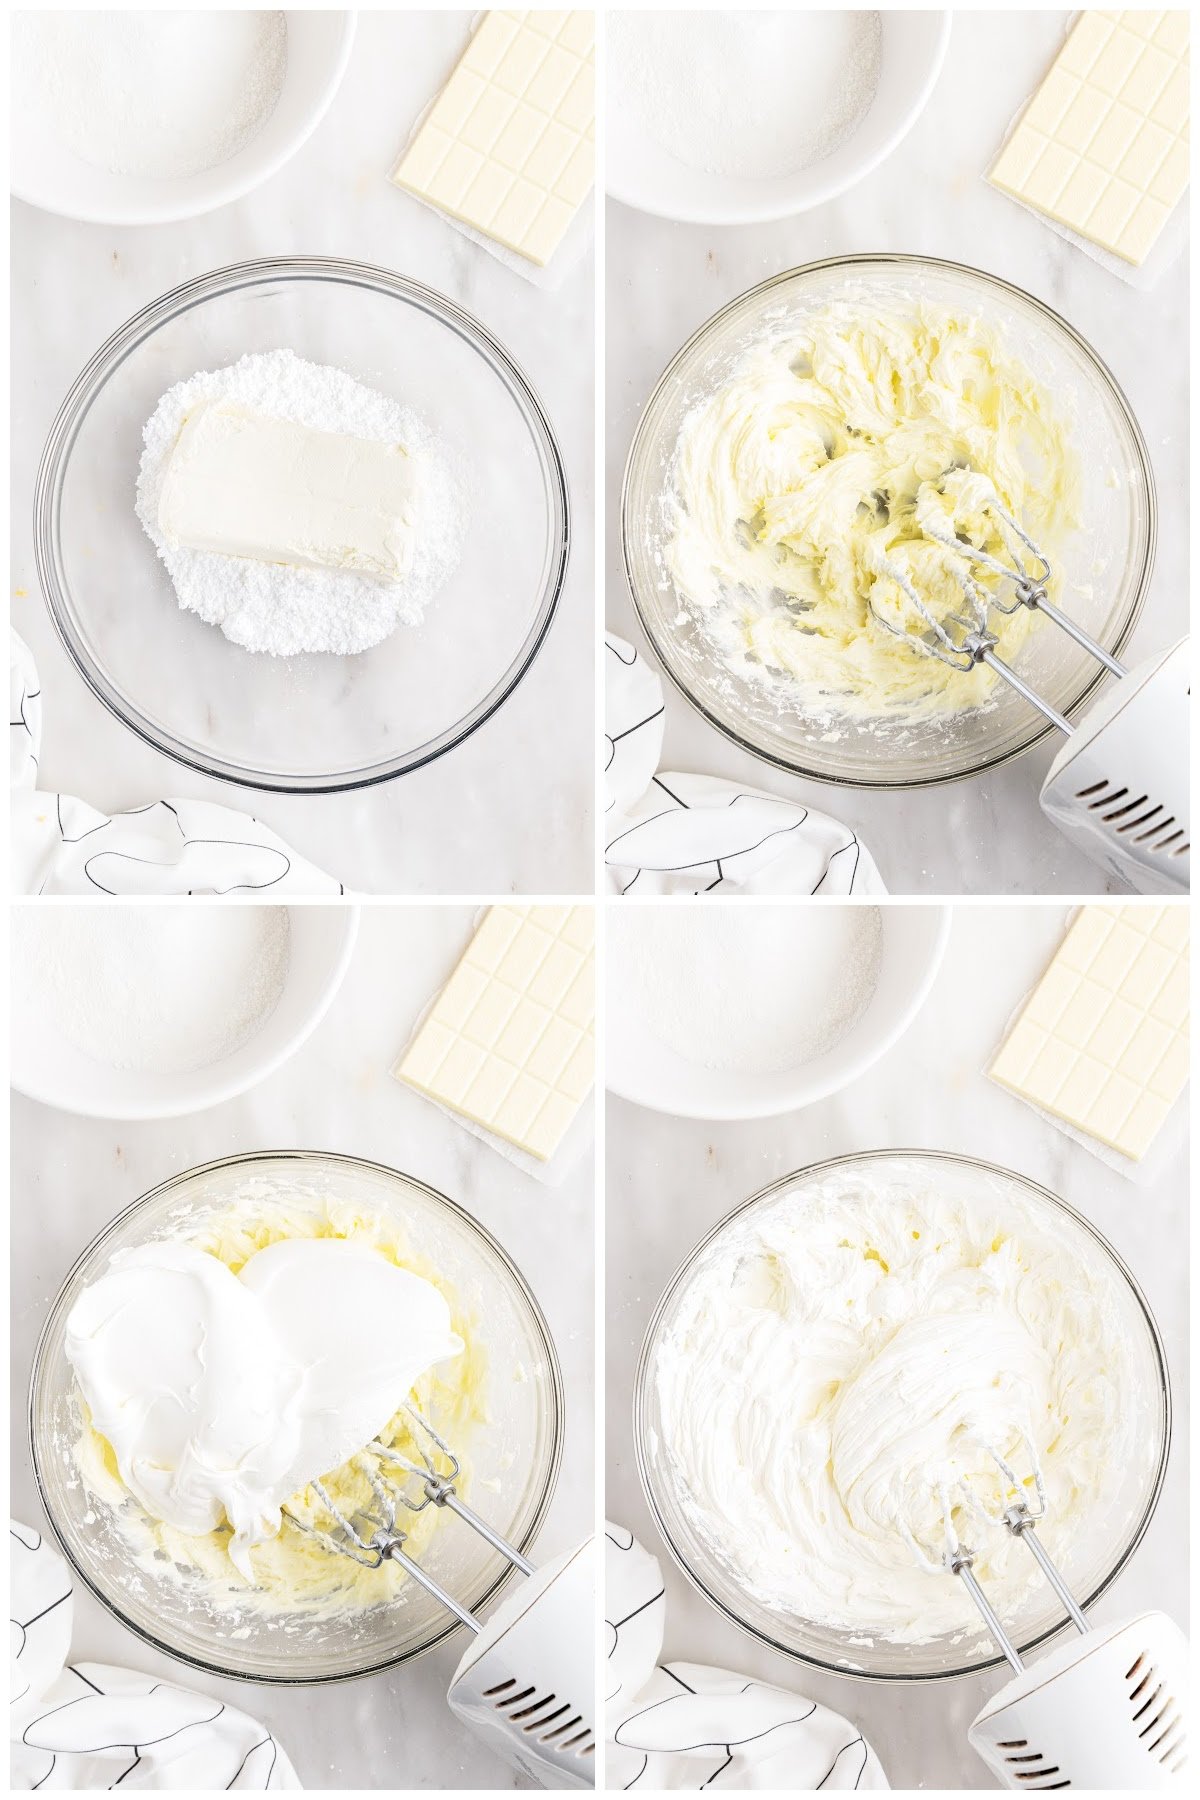 Four steps shown here, making one of the white chocolate lasagna layers.